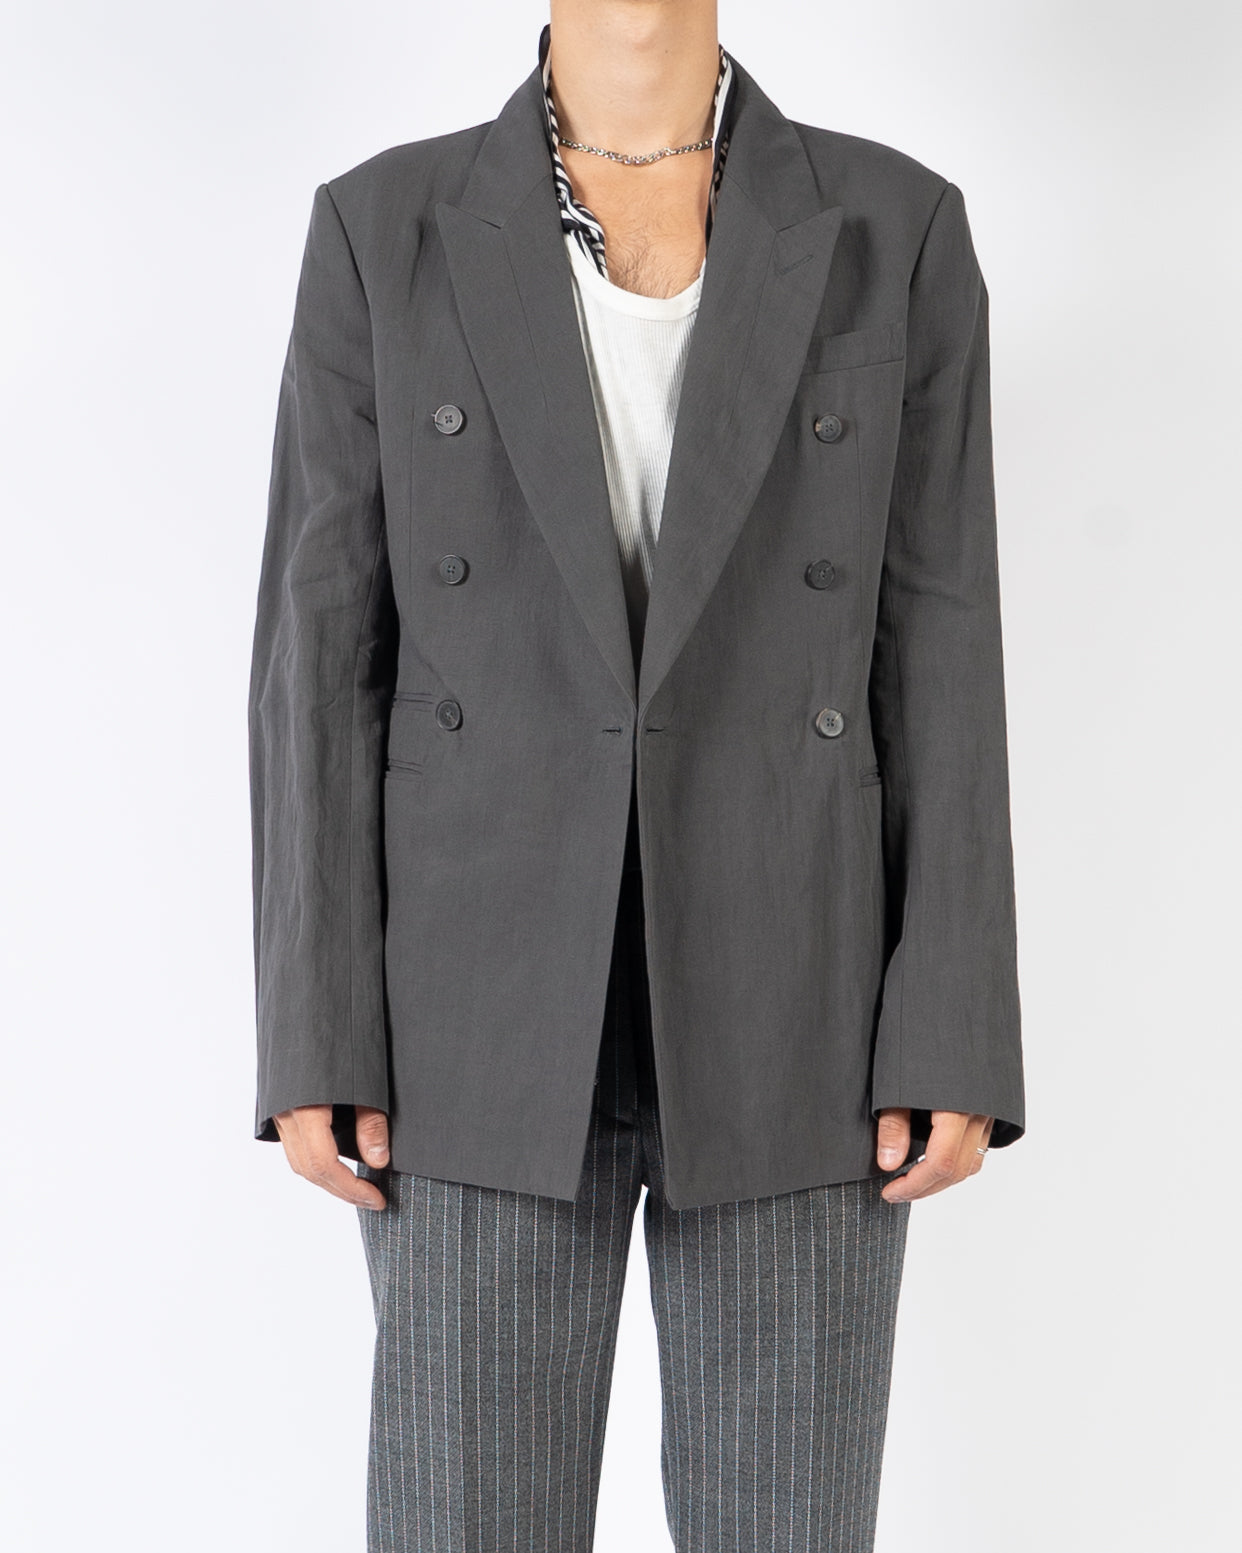 SS19 Grey Double Breasted Blazer